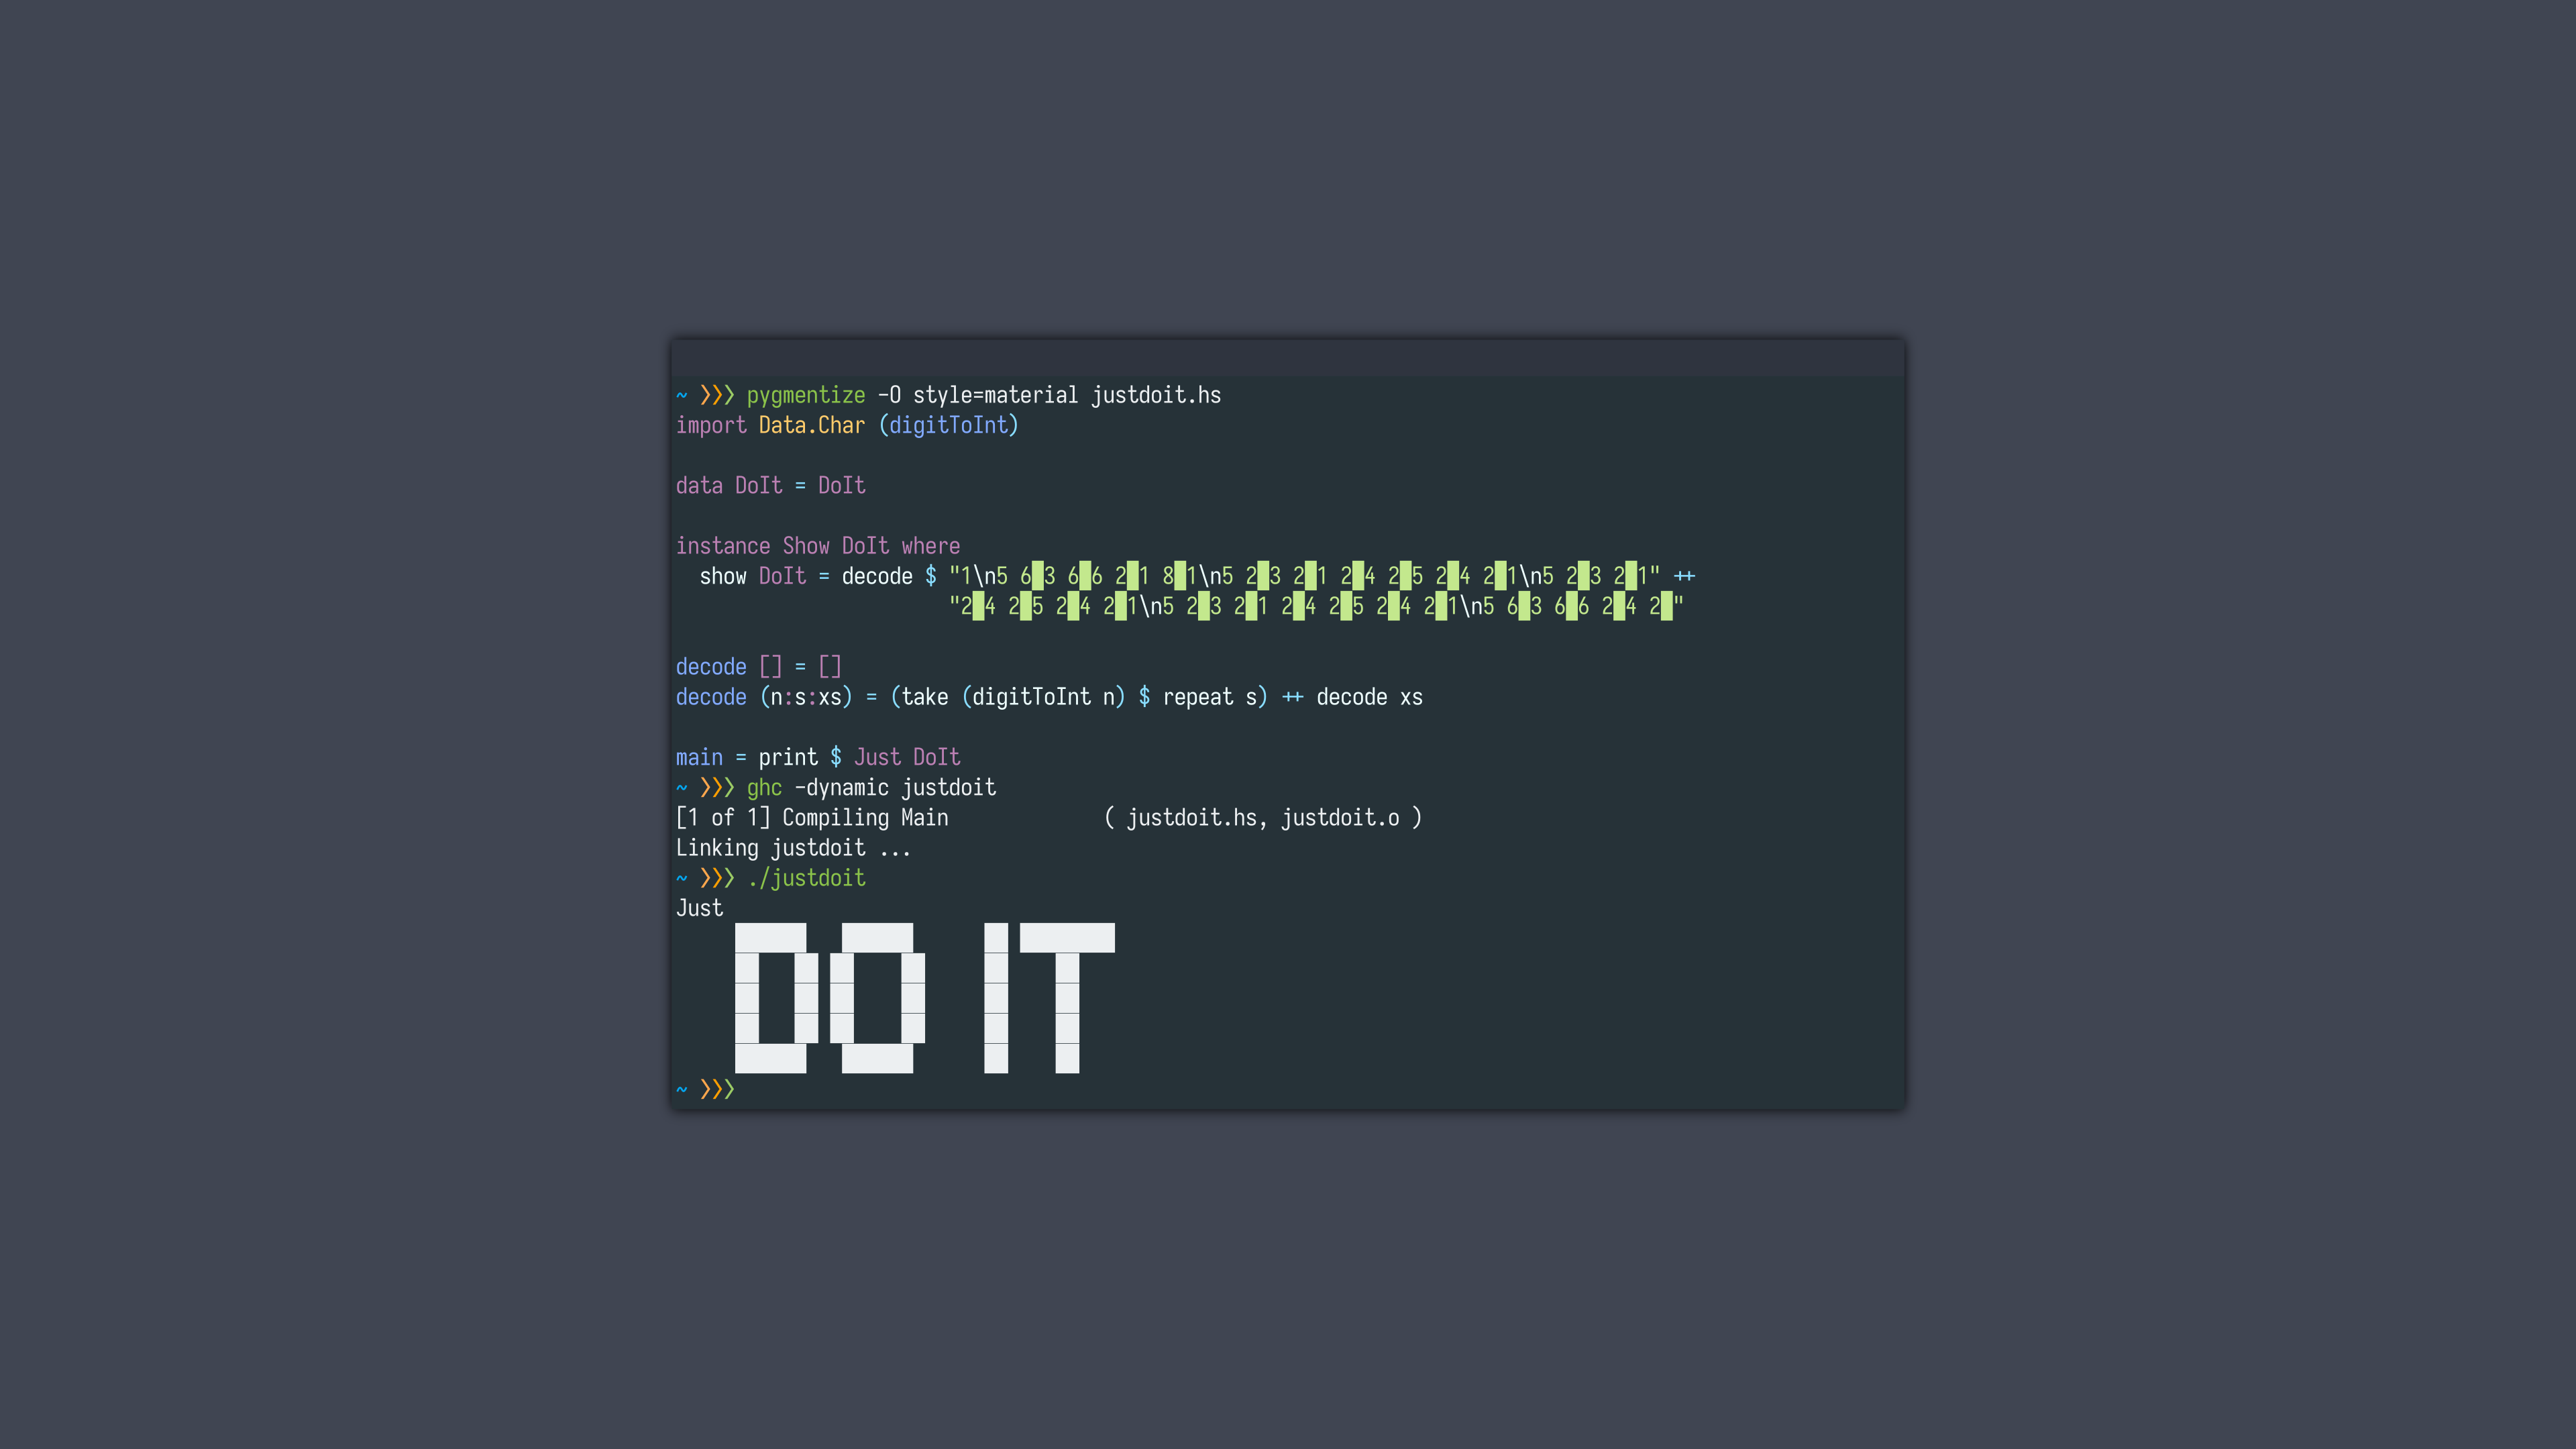 Code Simple Background Haskell Programming Language Programming Programming Language Minimalism 3840x2160